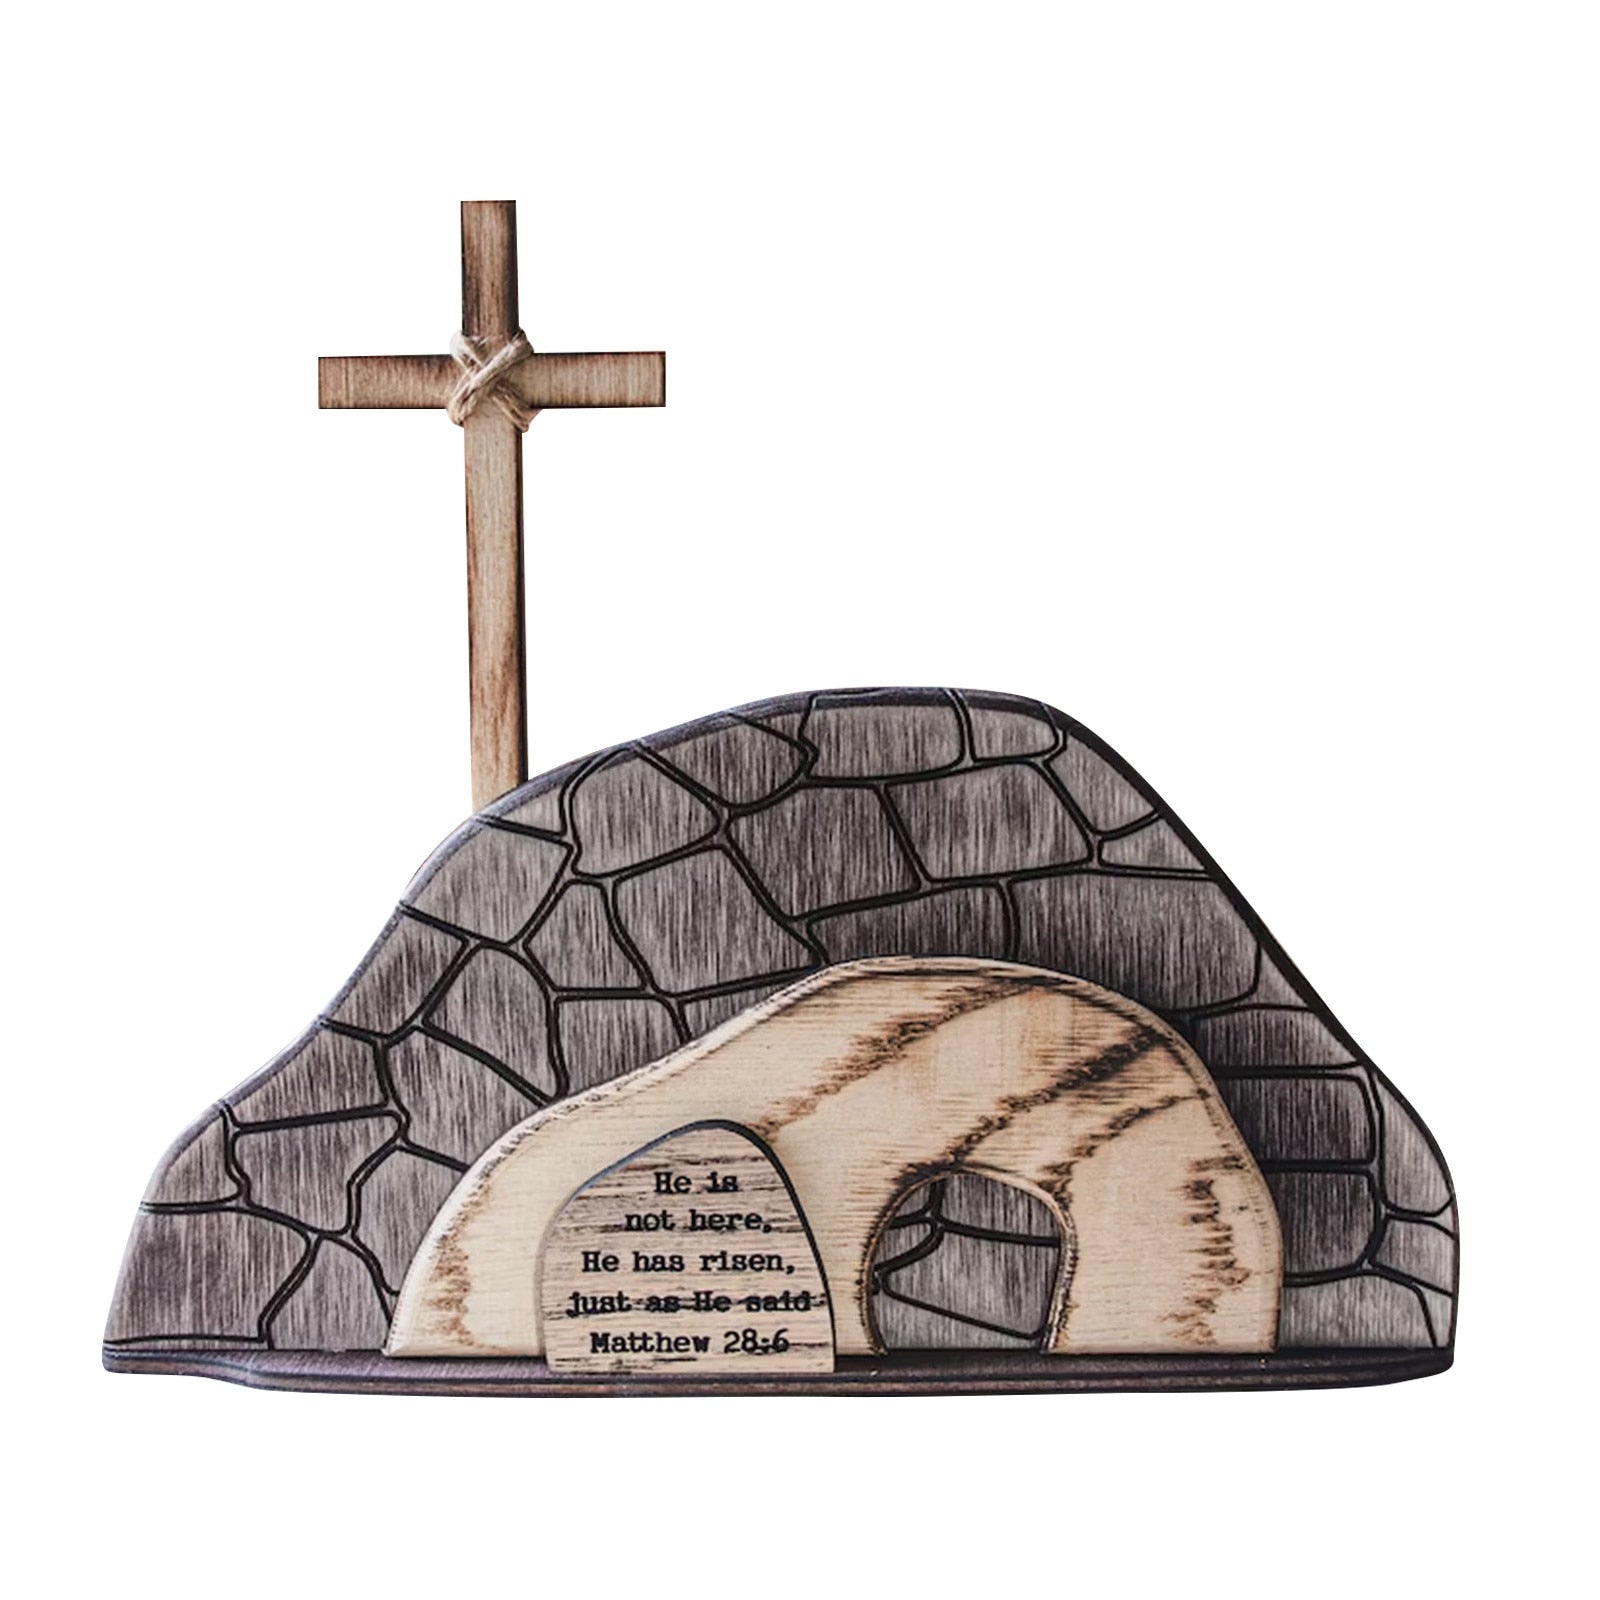 Wooden Easter Resurrection Scene Set - He Is Risen Wooden - The Empty Tomb Wooden For Easter Home Holiday Table Décor